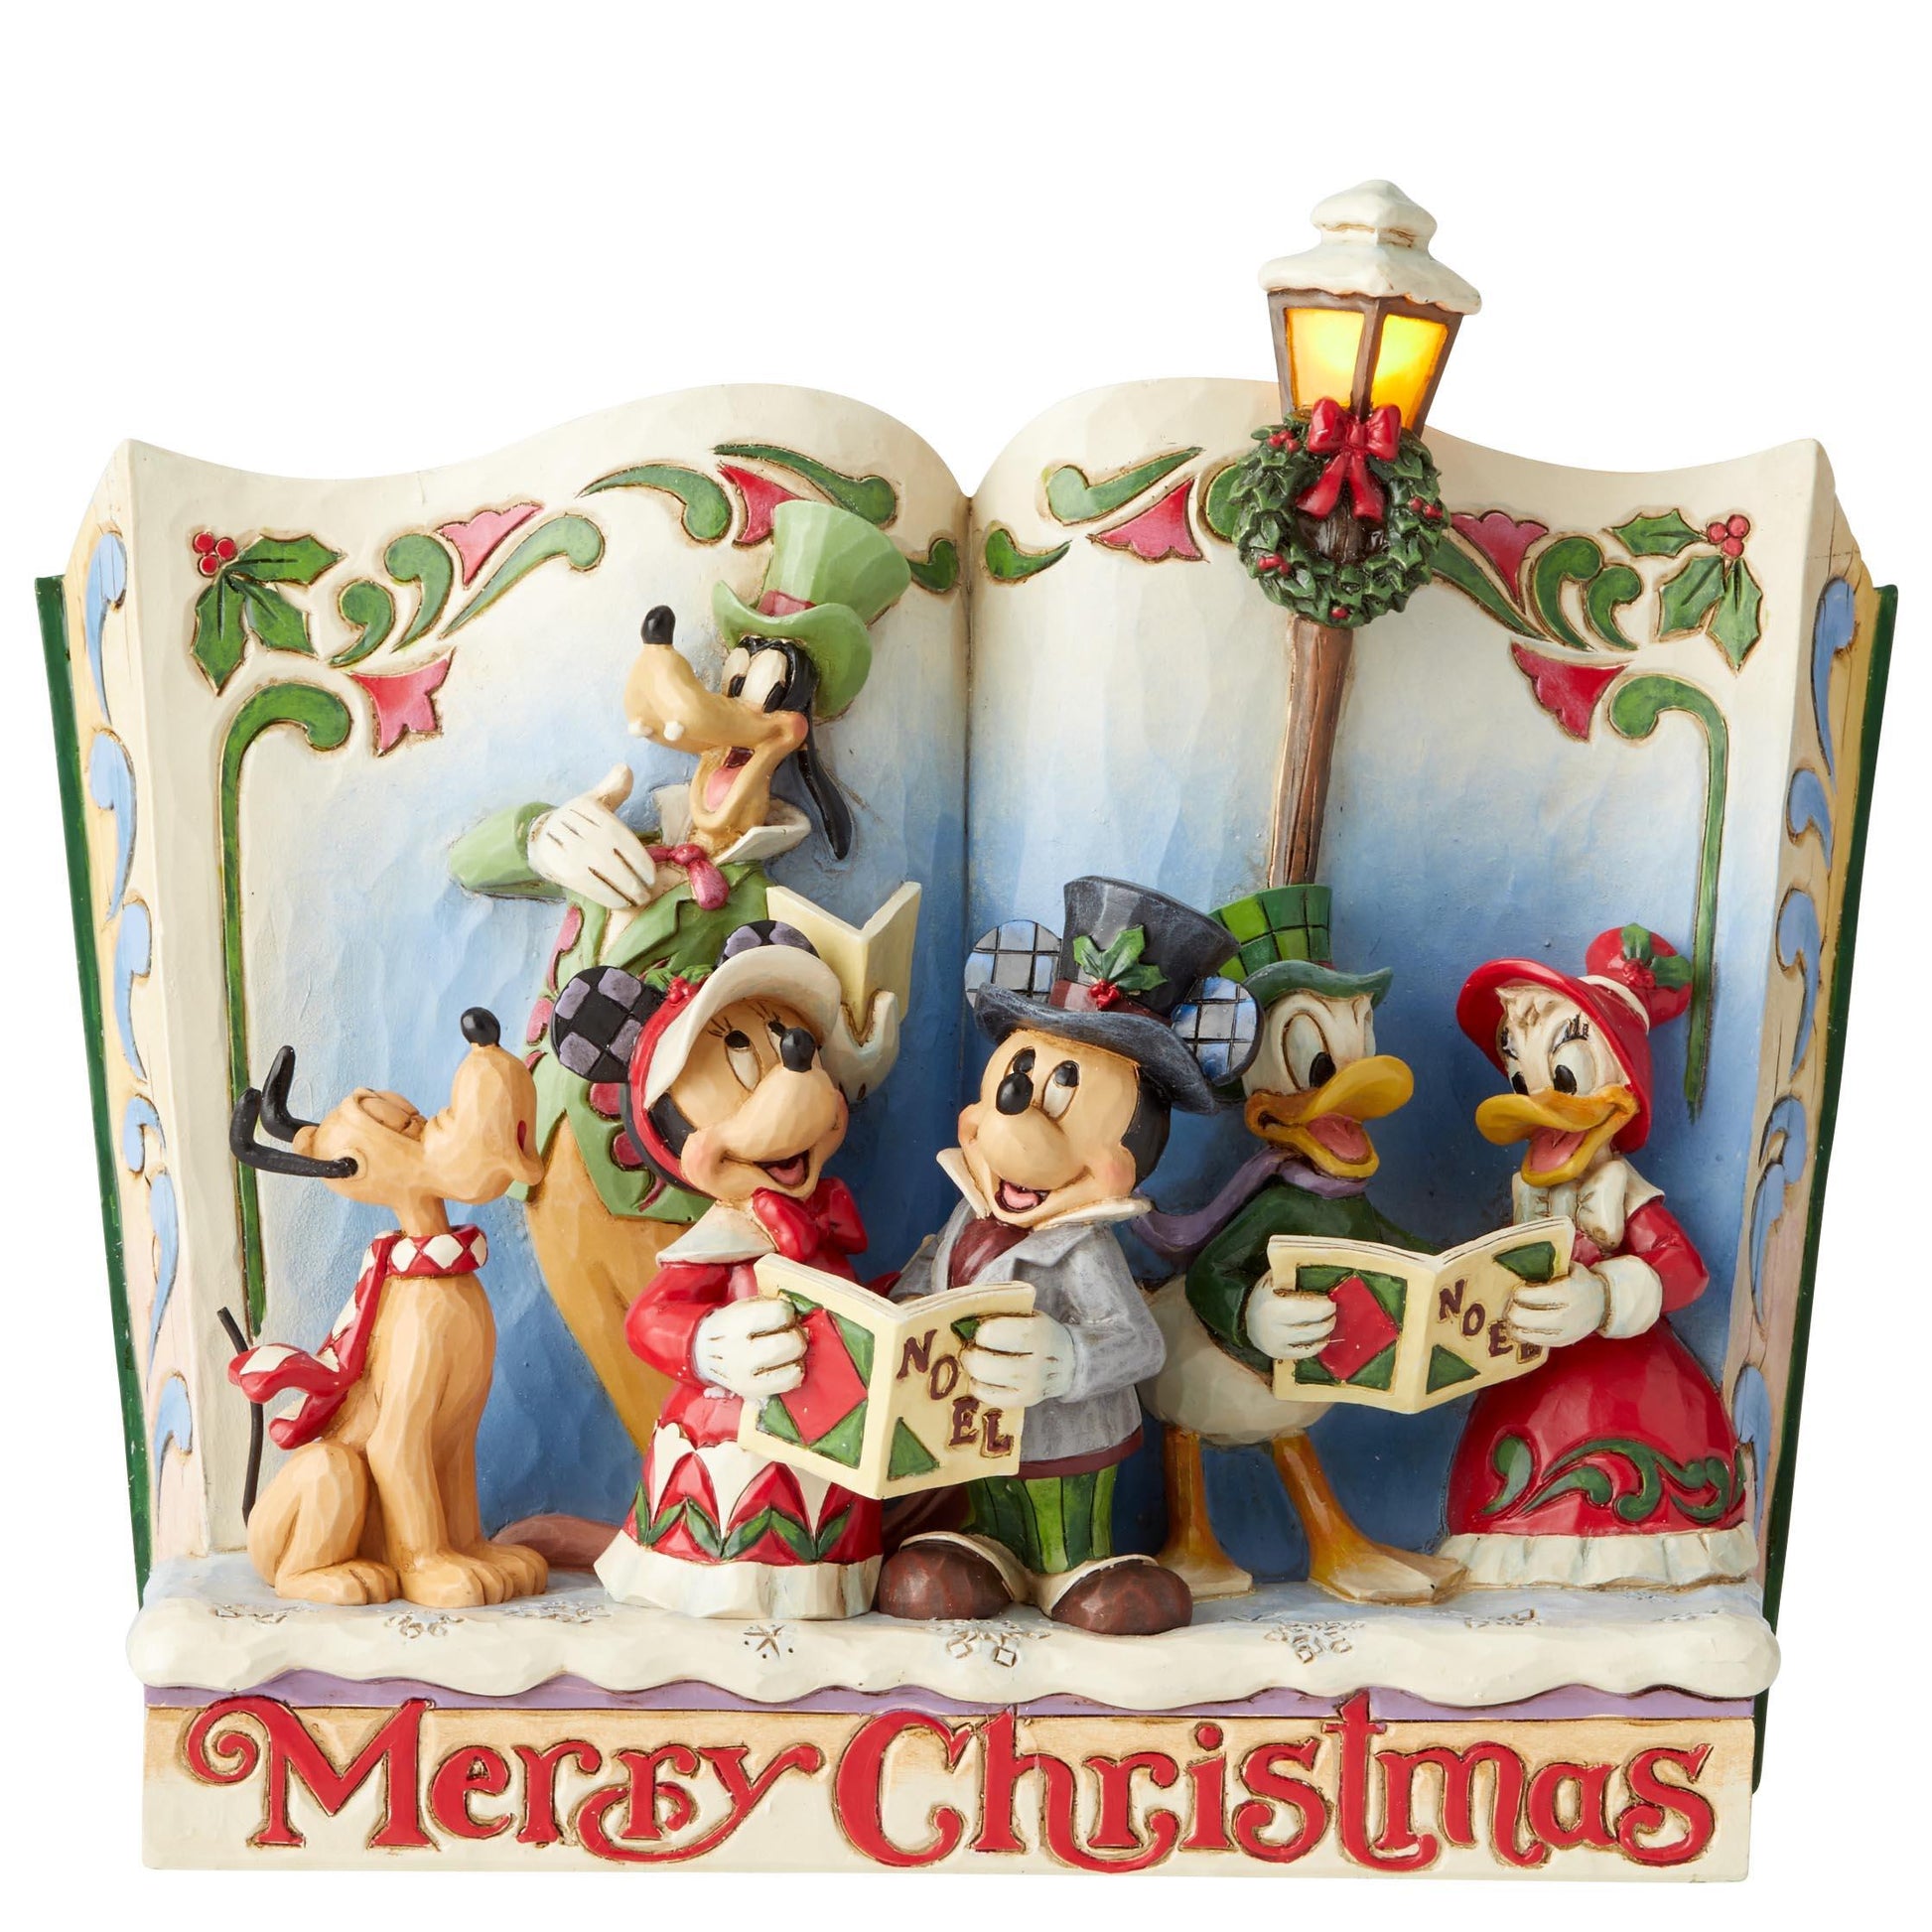 Merry Christmas (Christmas Carol Storybook) (Disney Traditions by Jim Shore) - Gallery Gifts Online 